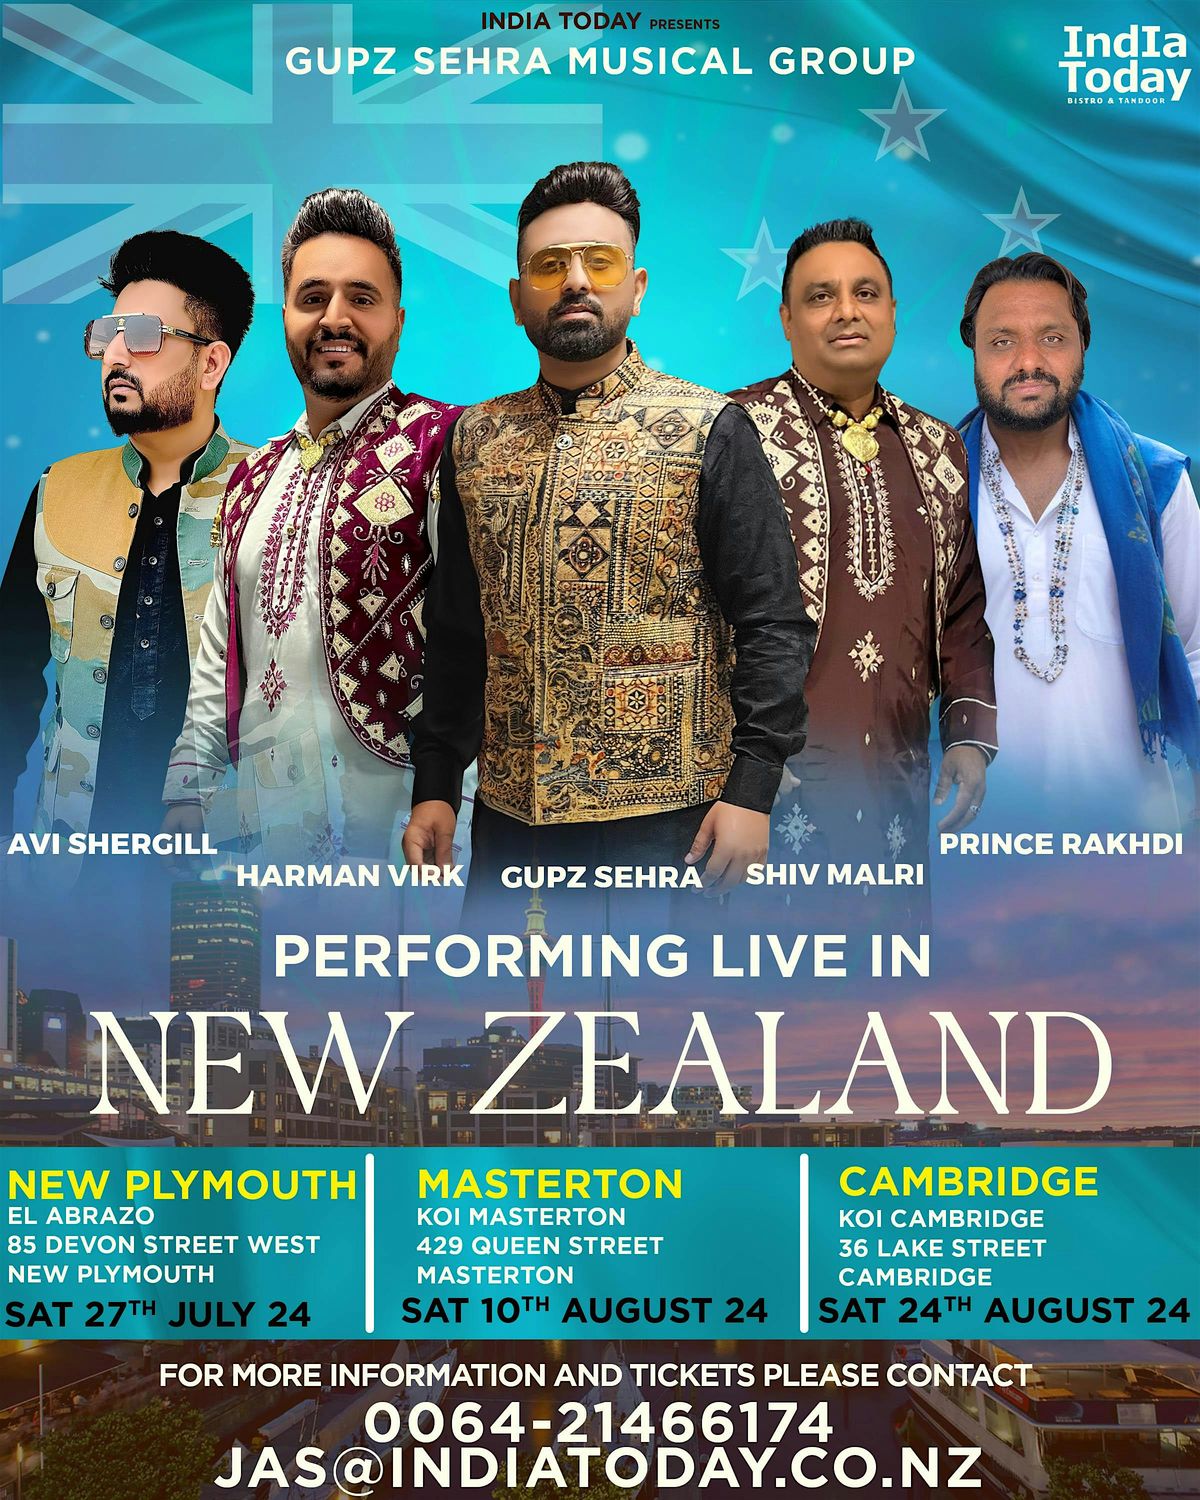 Gupz Sehra Musical Group Live in Cambridge - New Zealand